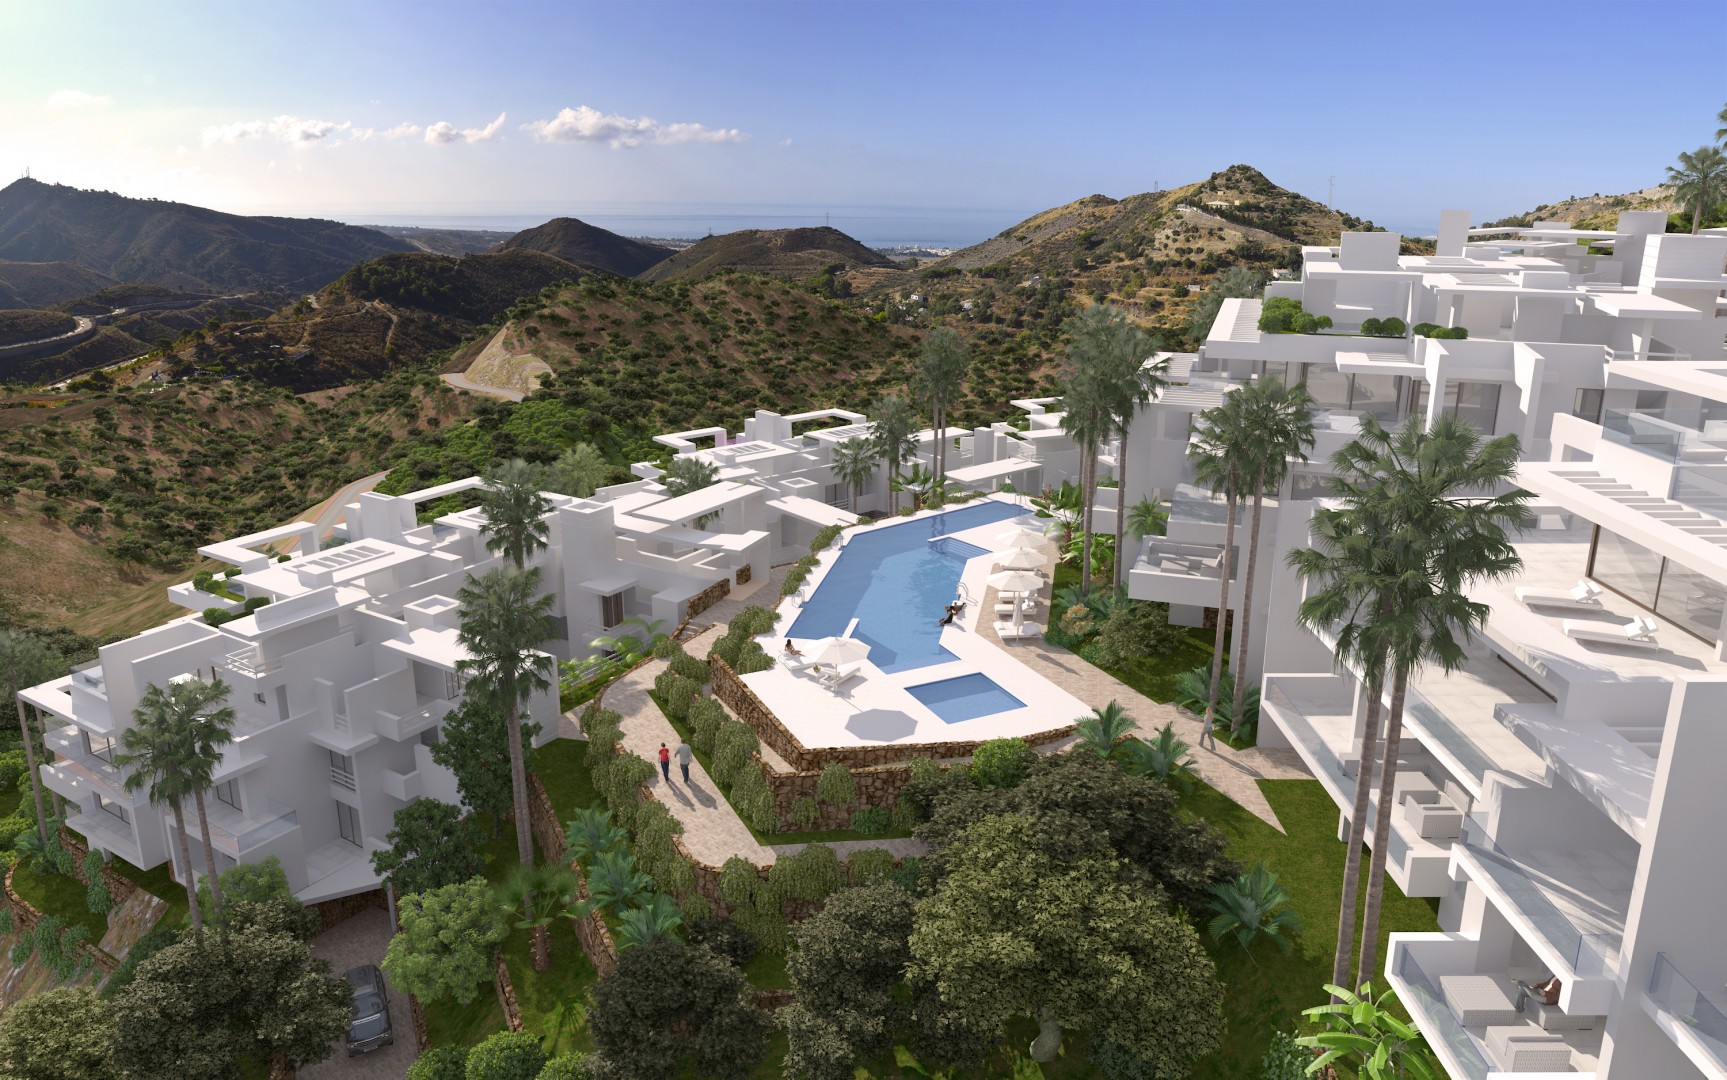 New exclusive urbanisation with apartments and villas close to Marbella.PL70